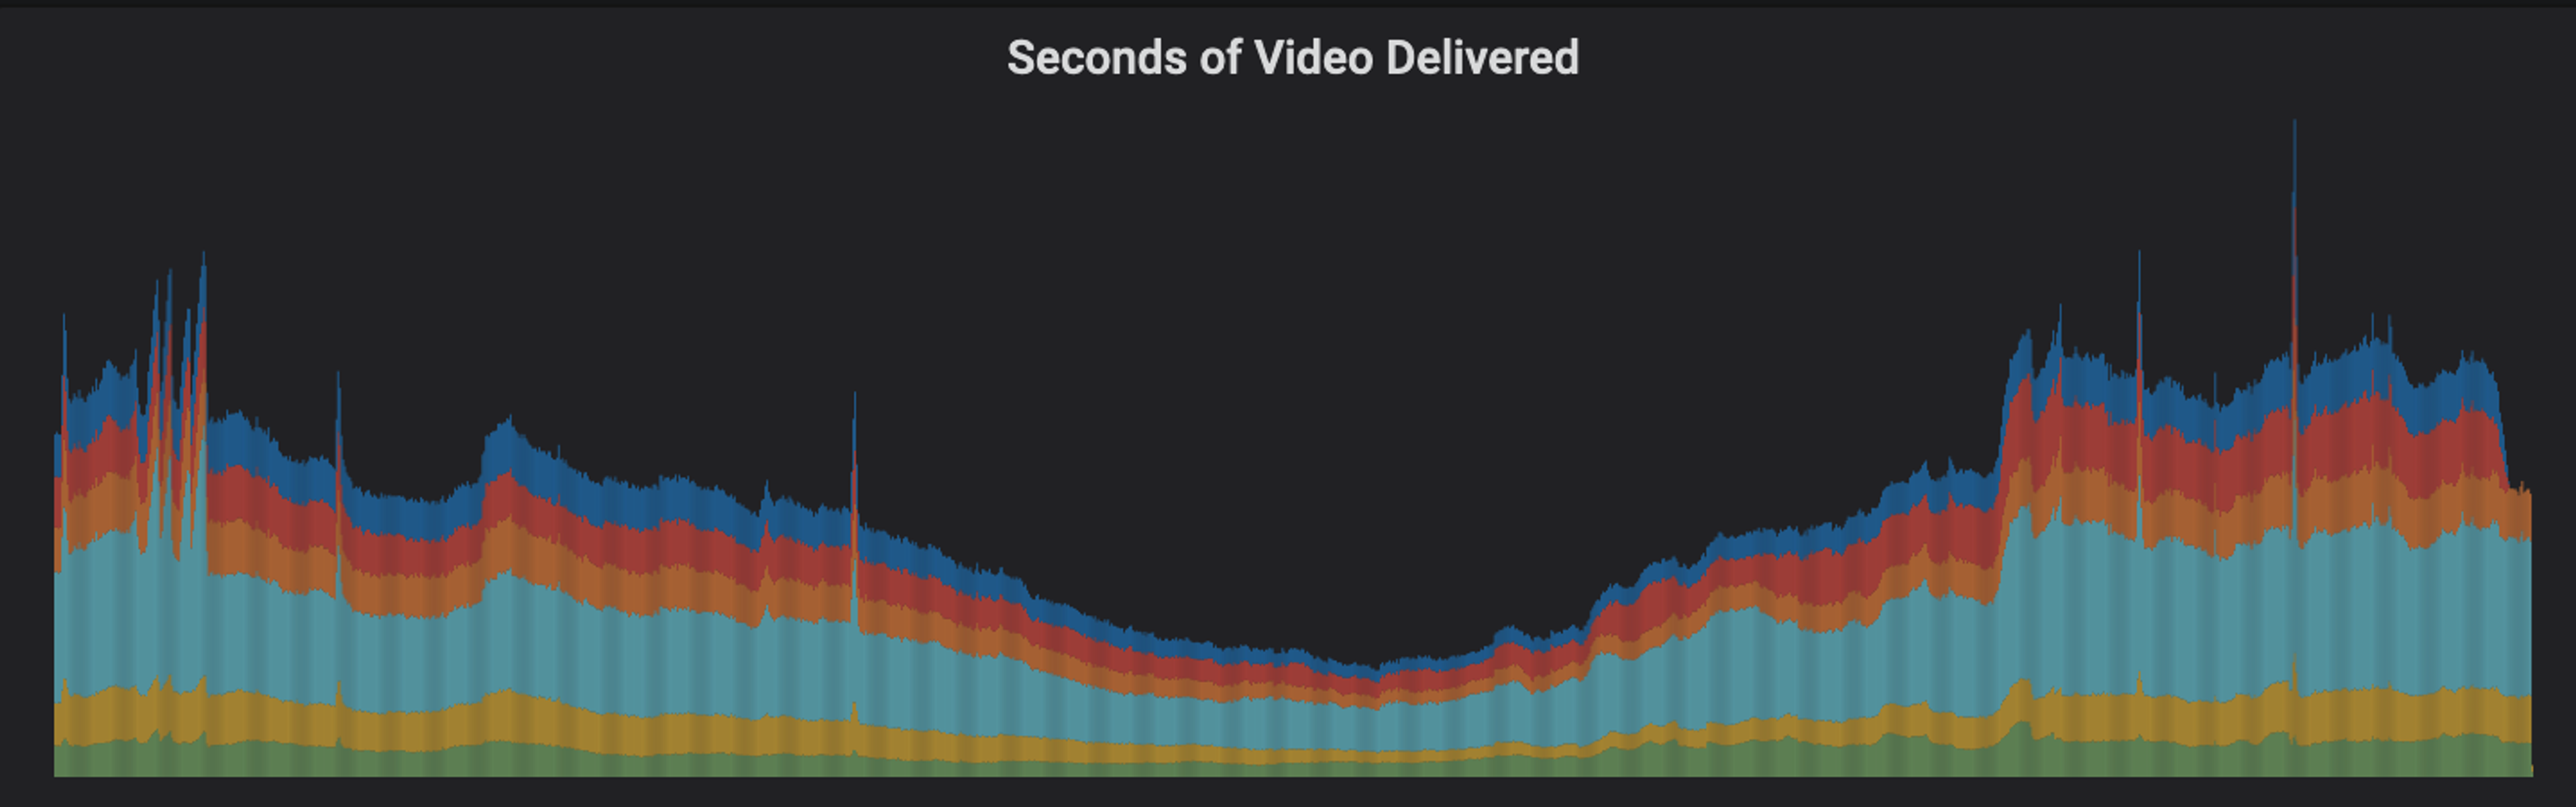 chart depicting seconds of video delivered